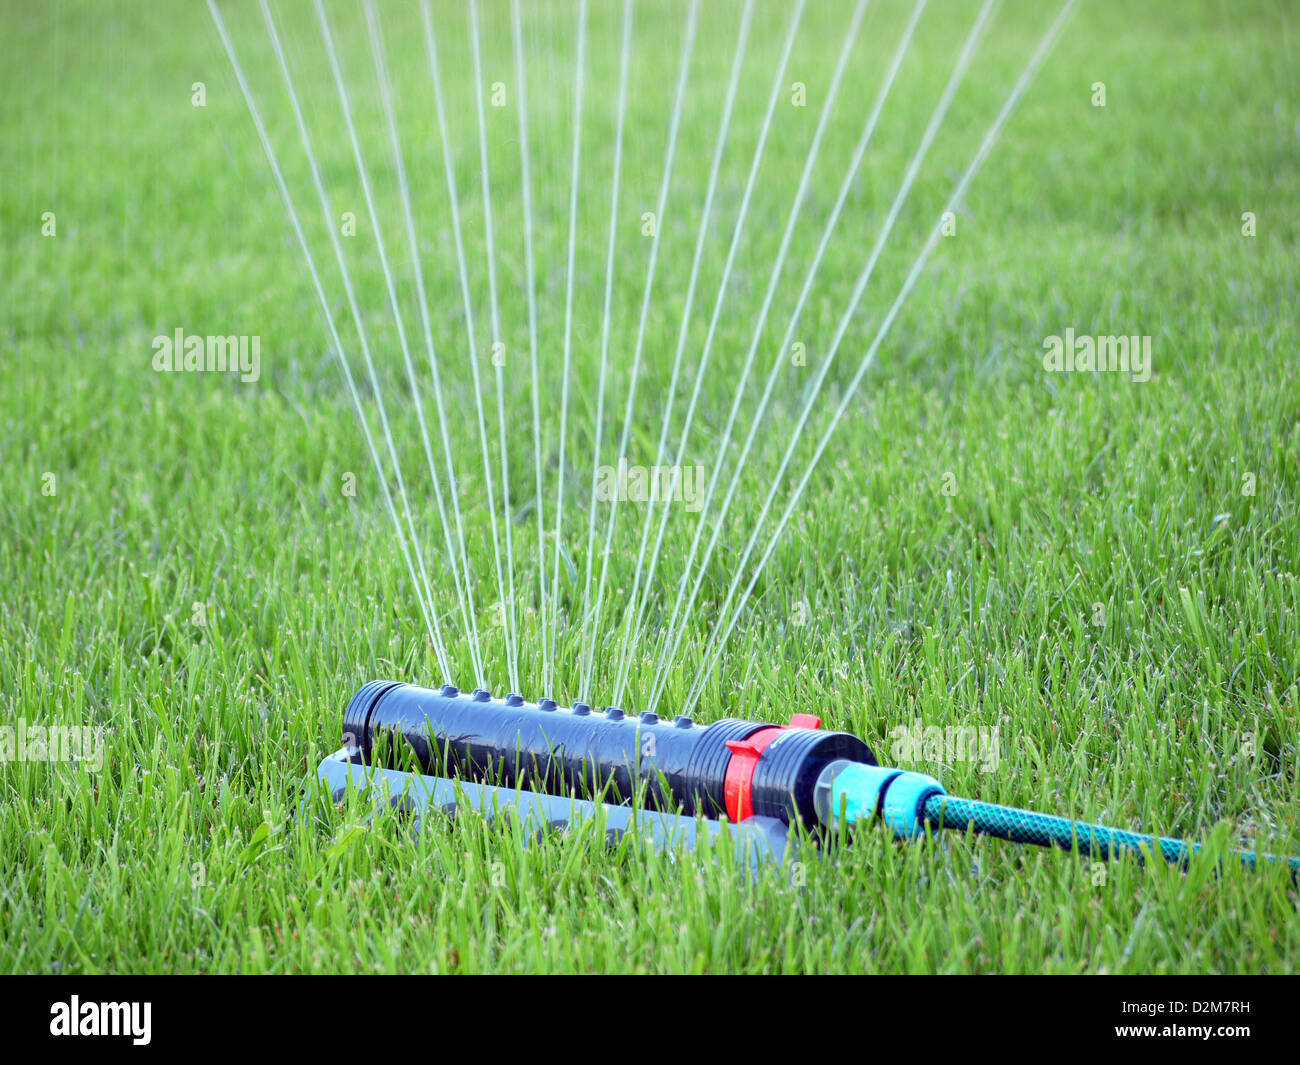 Lawn being irrigated by sprinkler Stock Photo